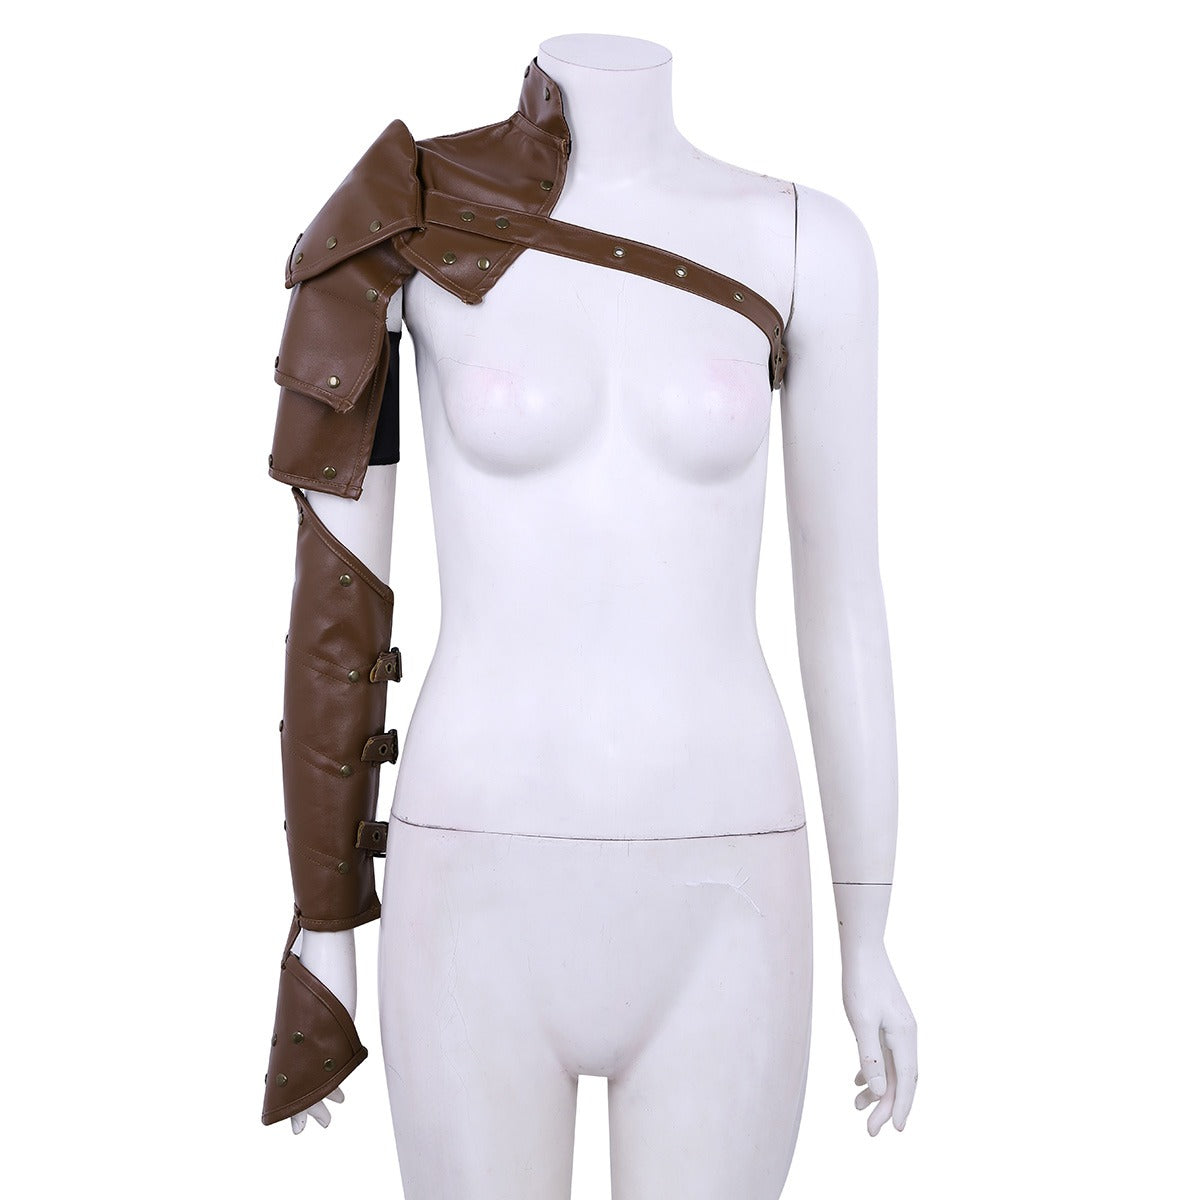 Women's Medieval Costume / Armor Cosplay Accessory / Vintage Warriors Knights Shoulder Harness - HARD'N'HEAVY